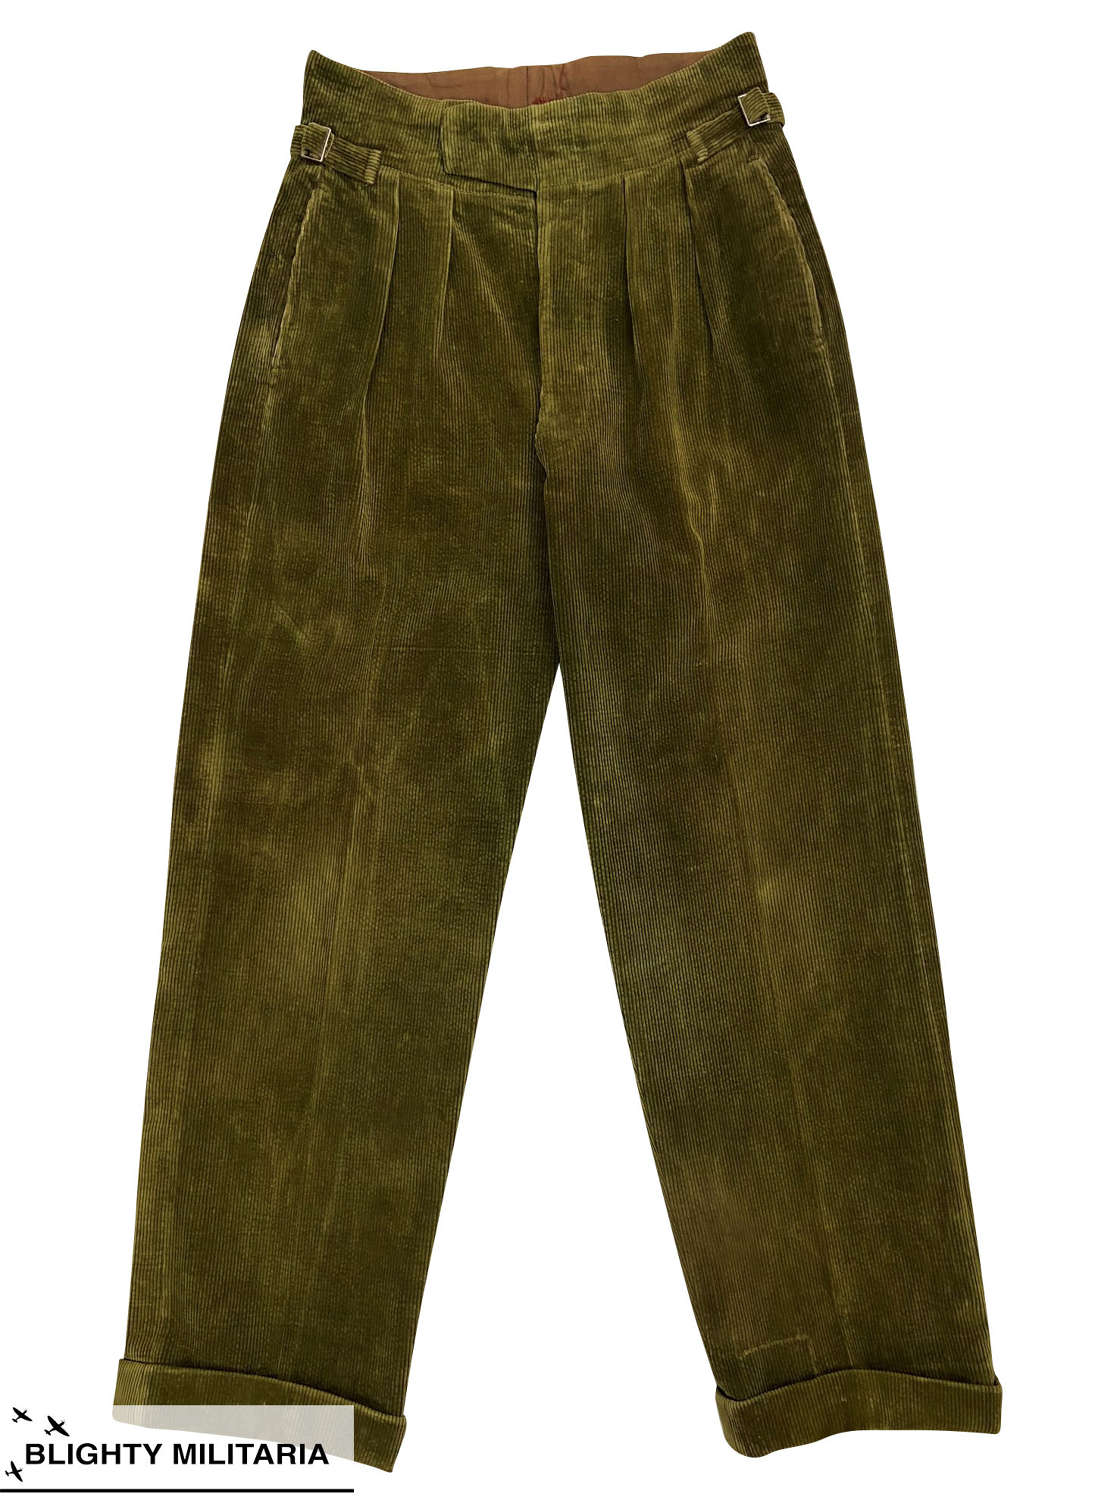 Rare Original 1937 Dated British Green Corduroy Trousers by 'L Fulton'